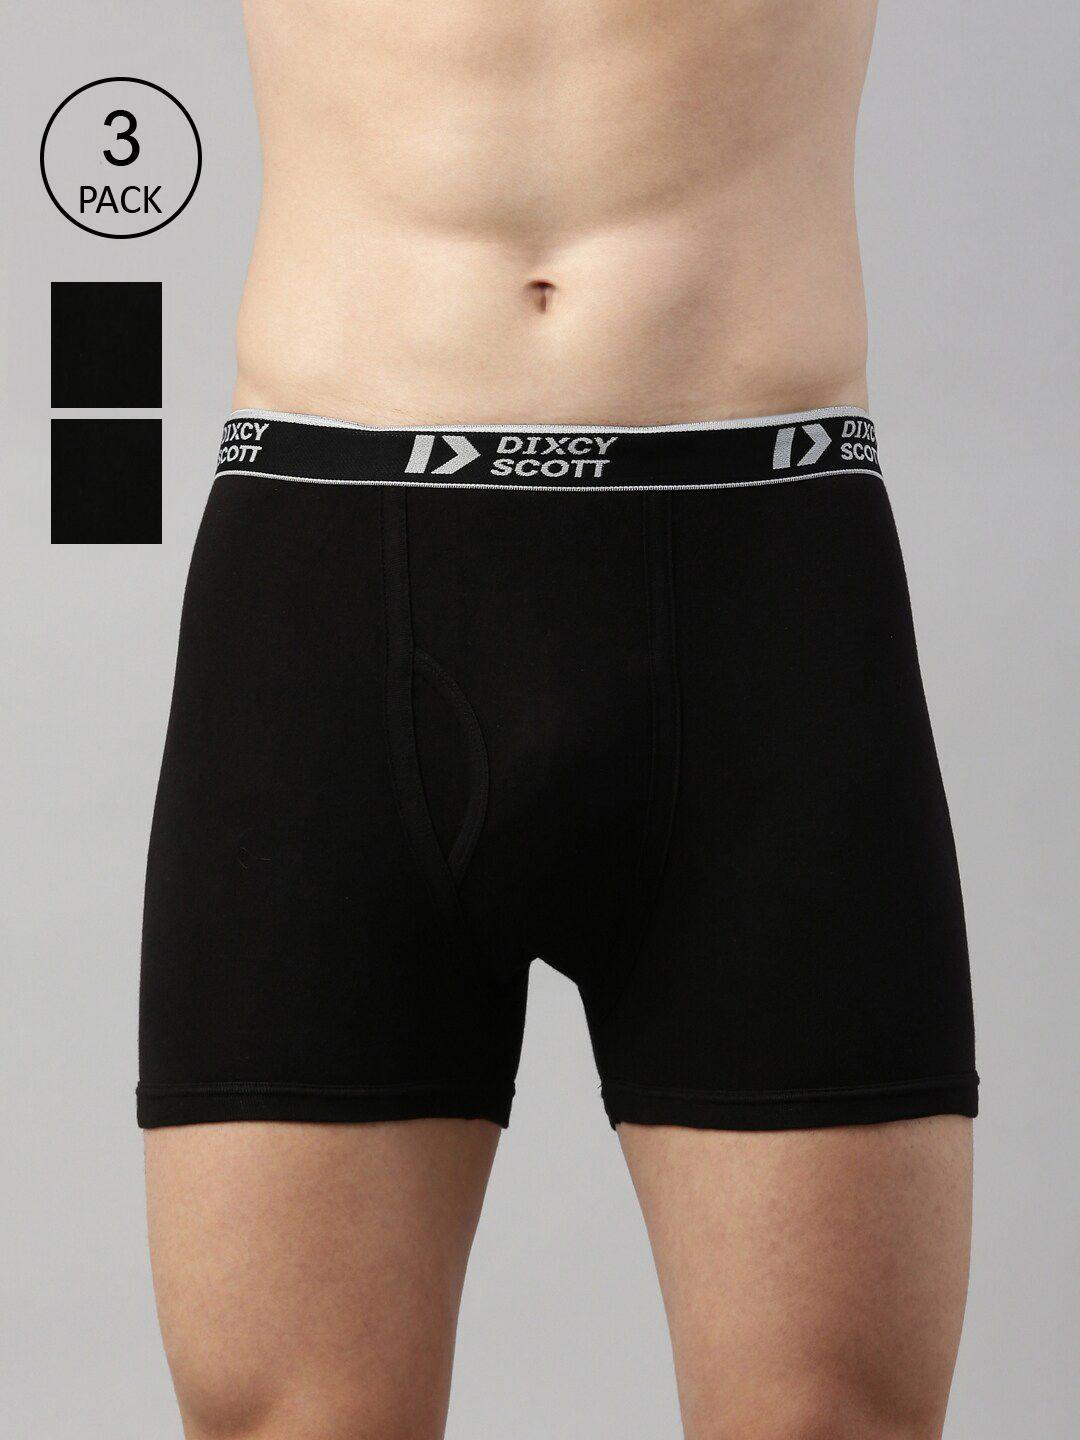 dixcy scott men pack of 3 solid cotton trunks - dso-titan trunk-p3